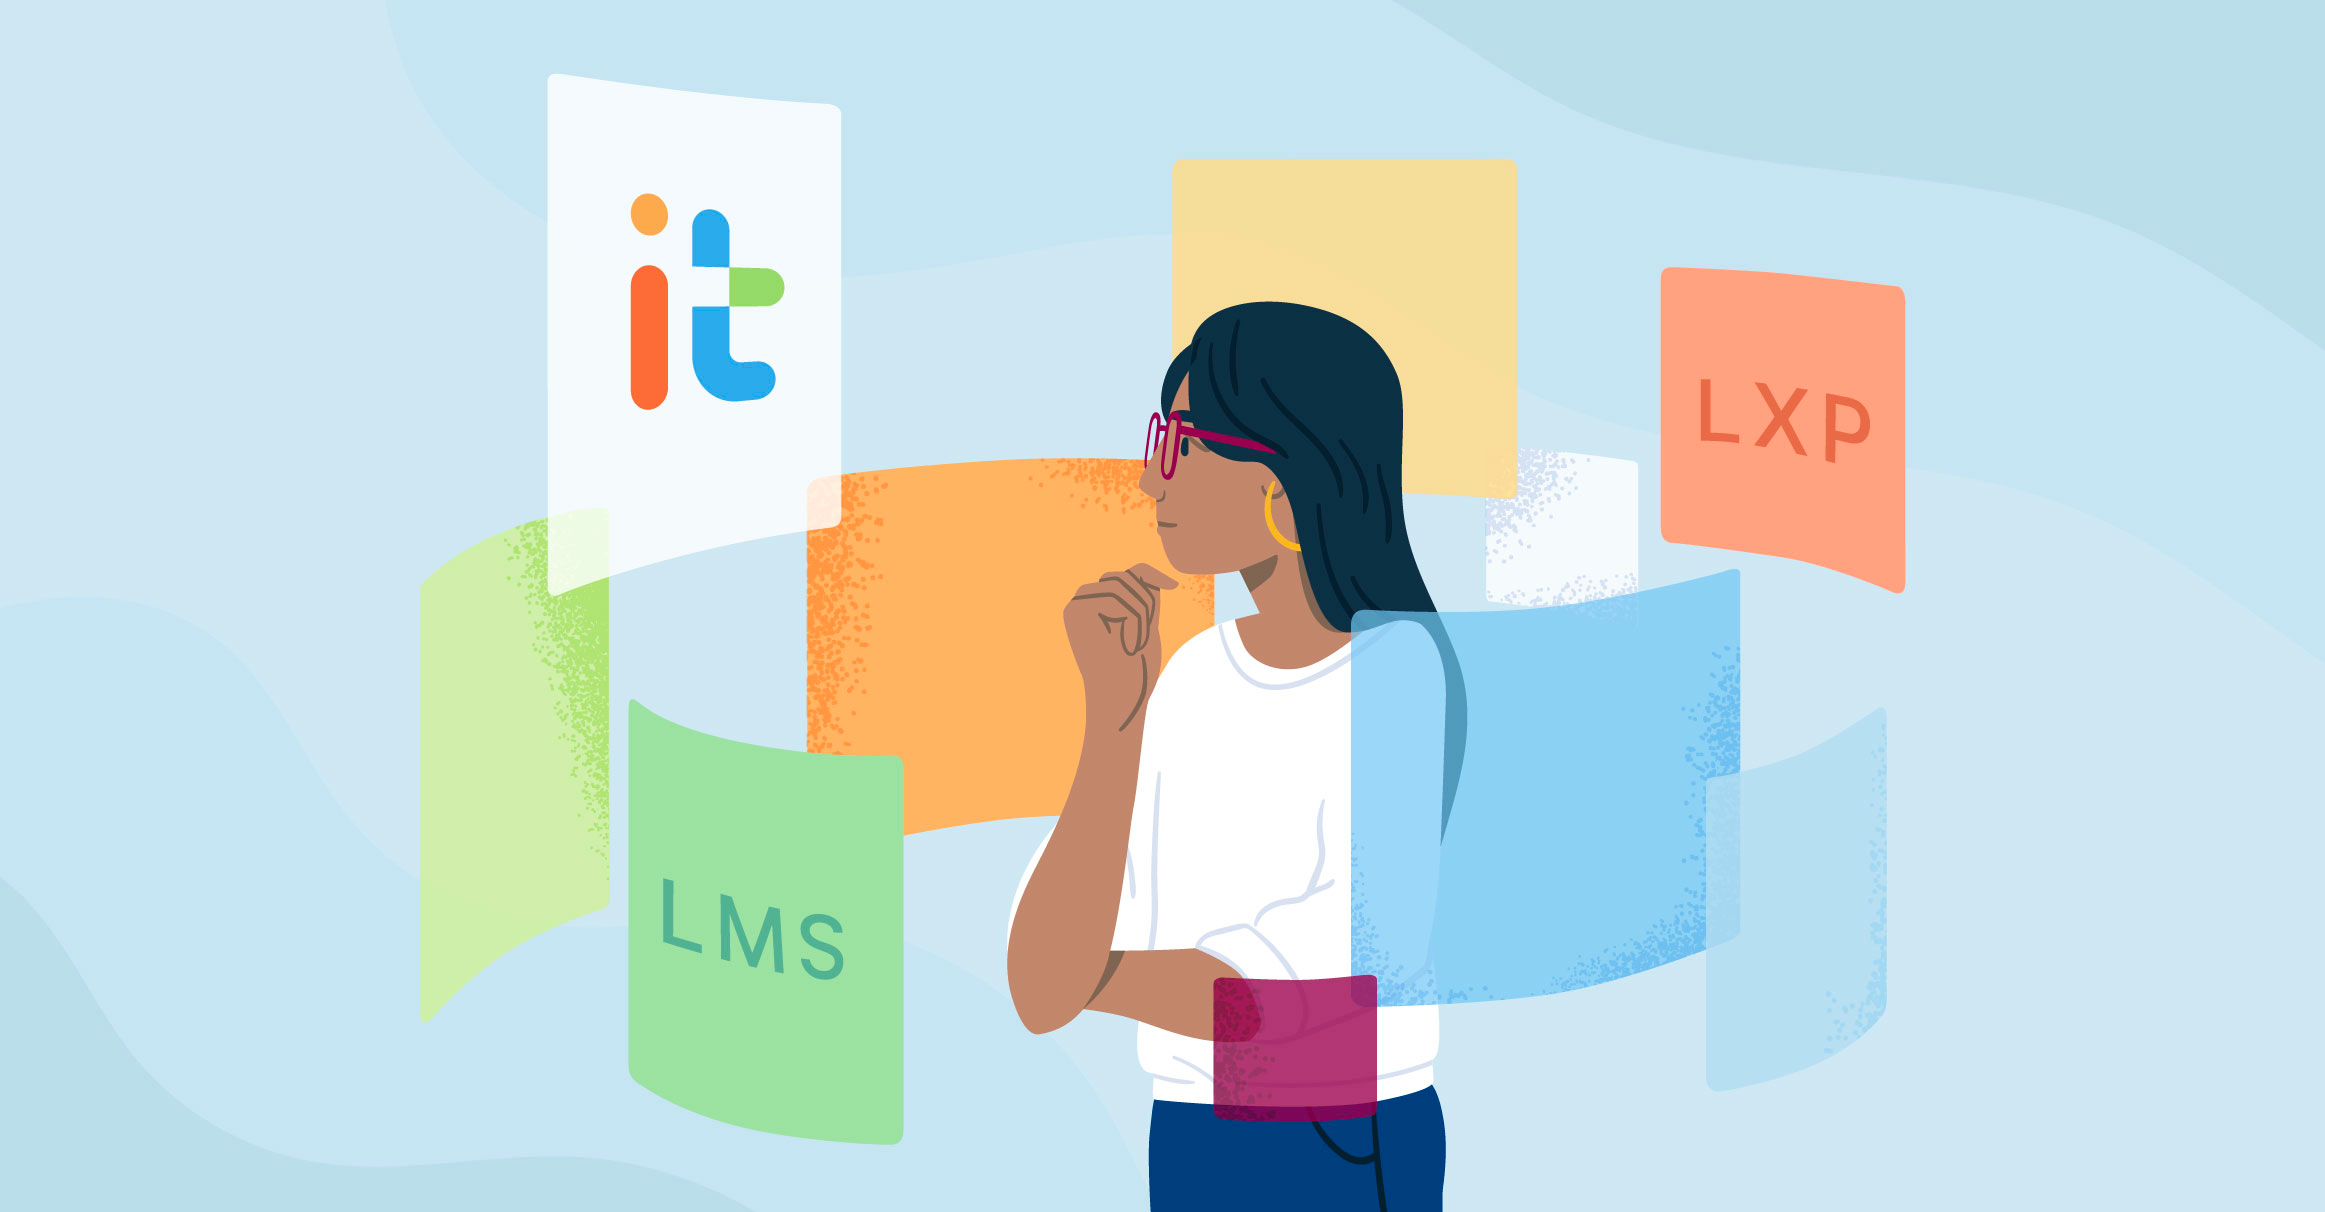 Exploring an Adaptive Learning Solution when already using an LMS and LXP — Why Realizeit?